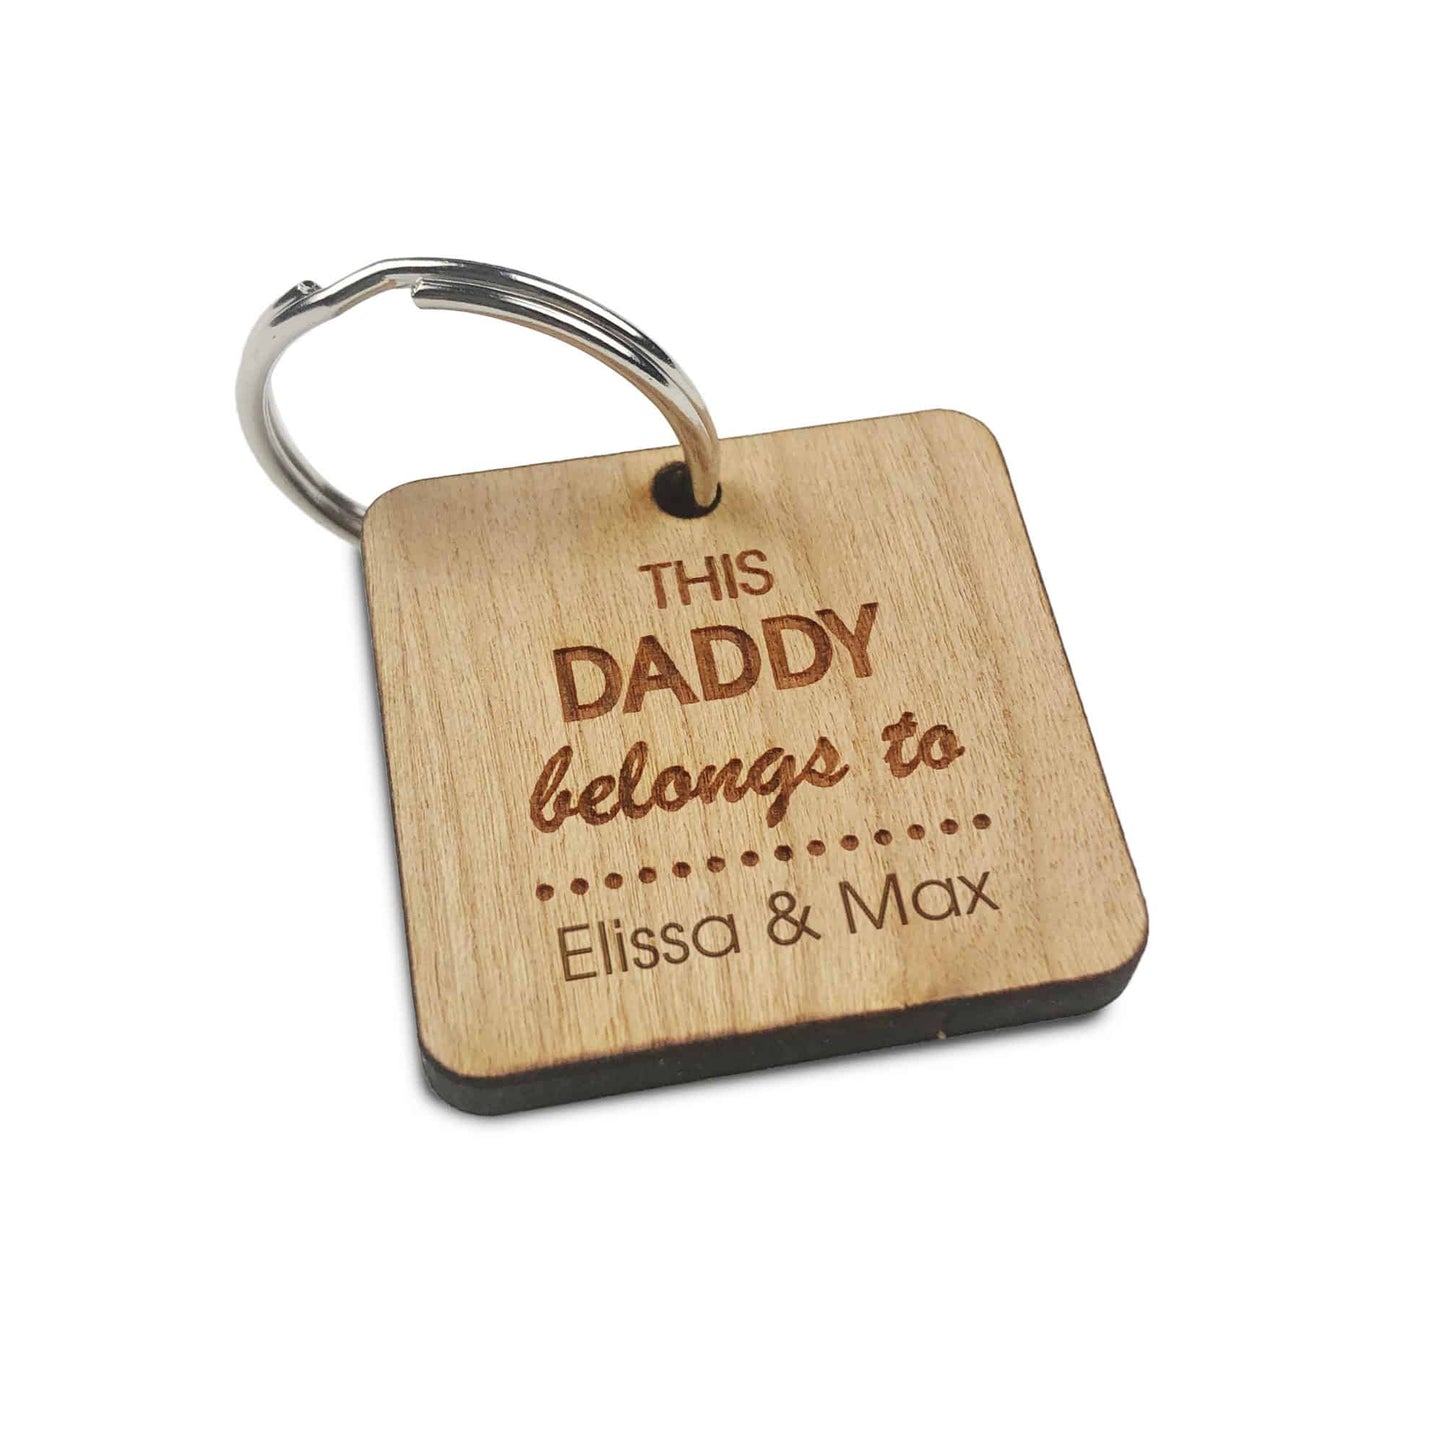 This Daddy Belongs to Square Wooden Key ring Gift Fathers Day Birthday